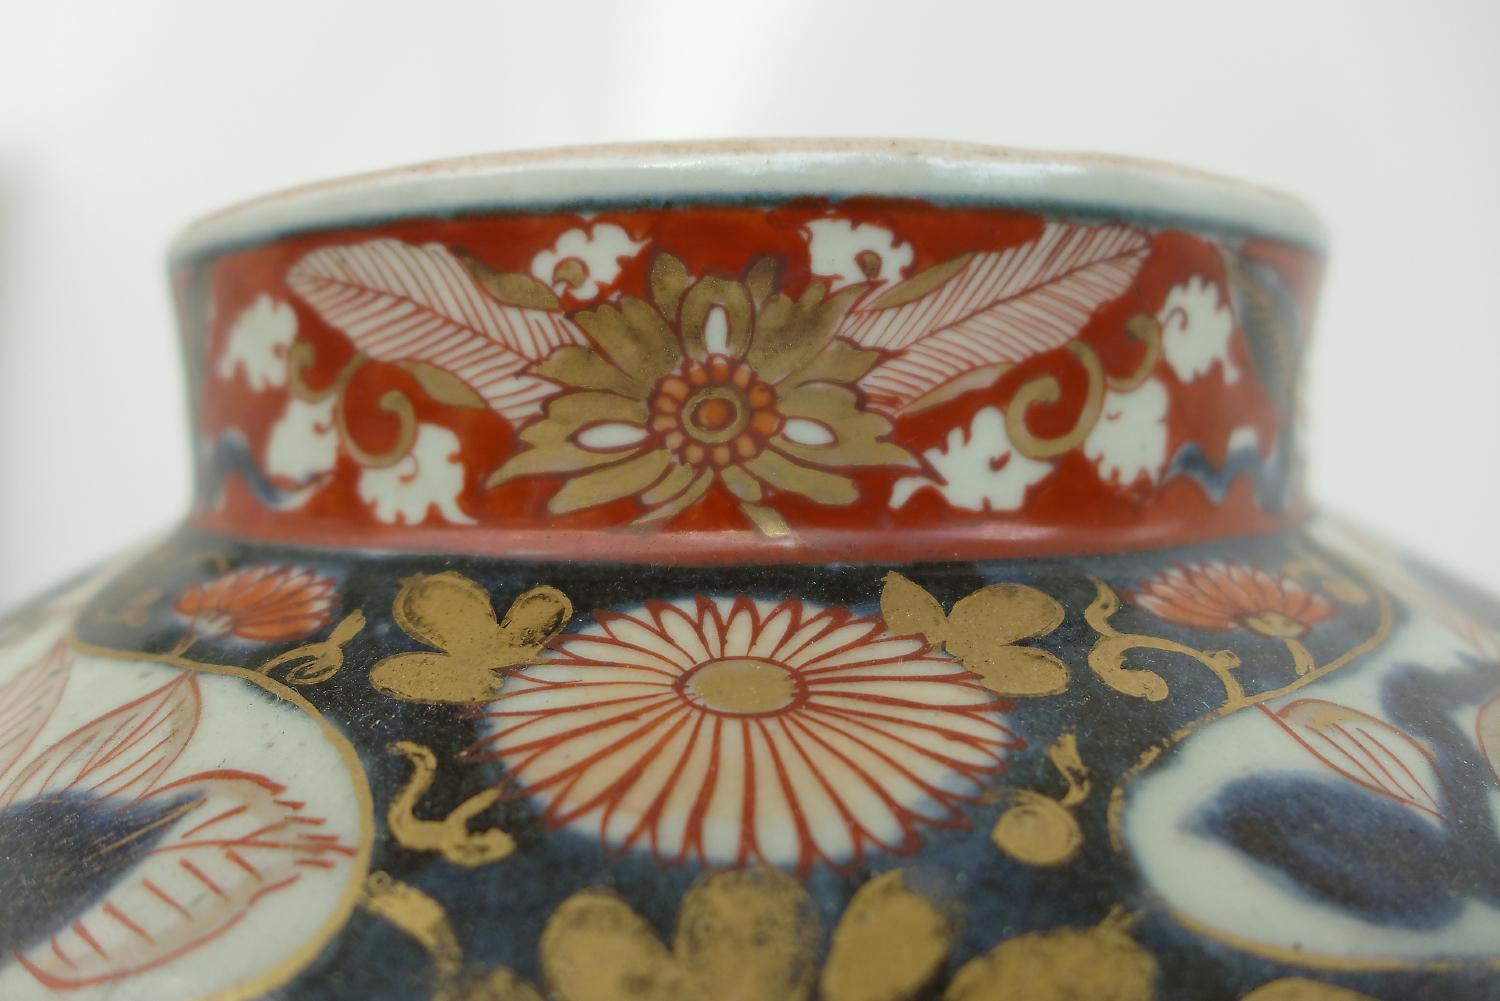 Baroque Imari Porcelain Vase and Cover from Japan, circa 1700